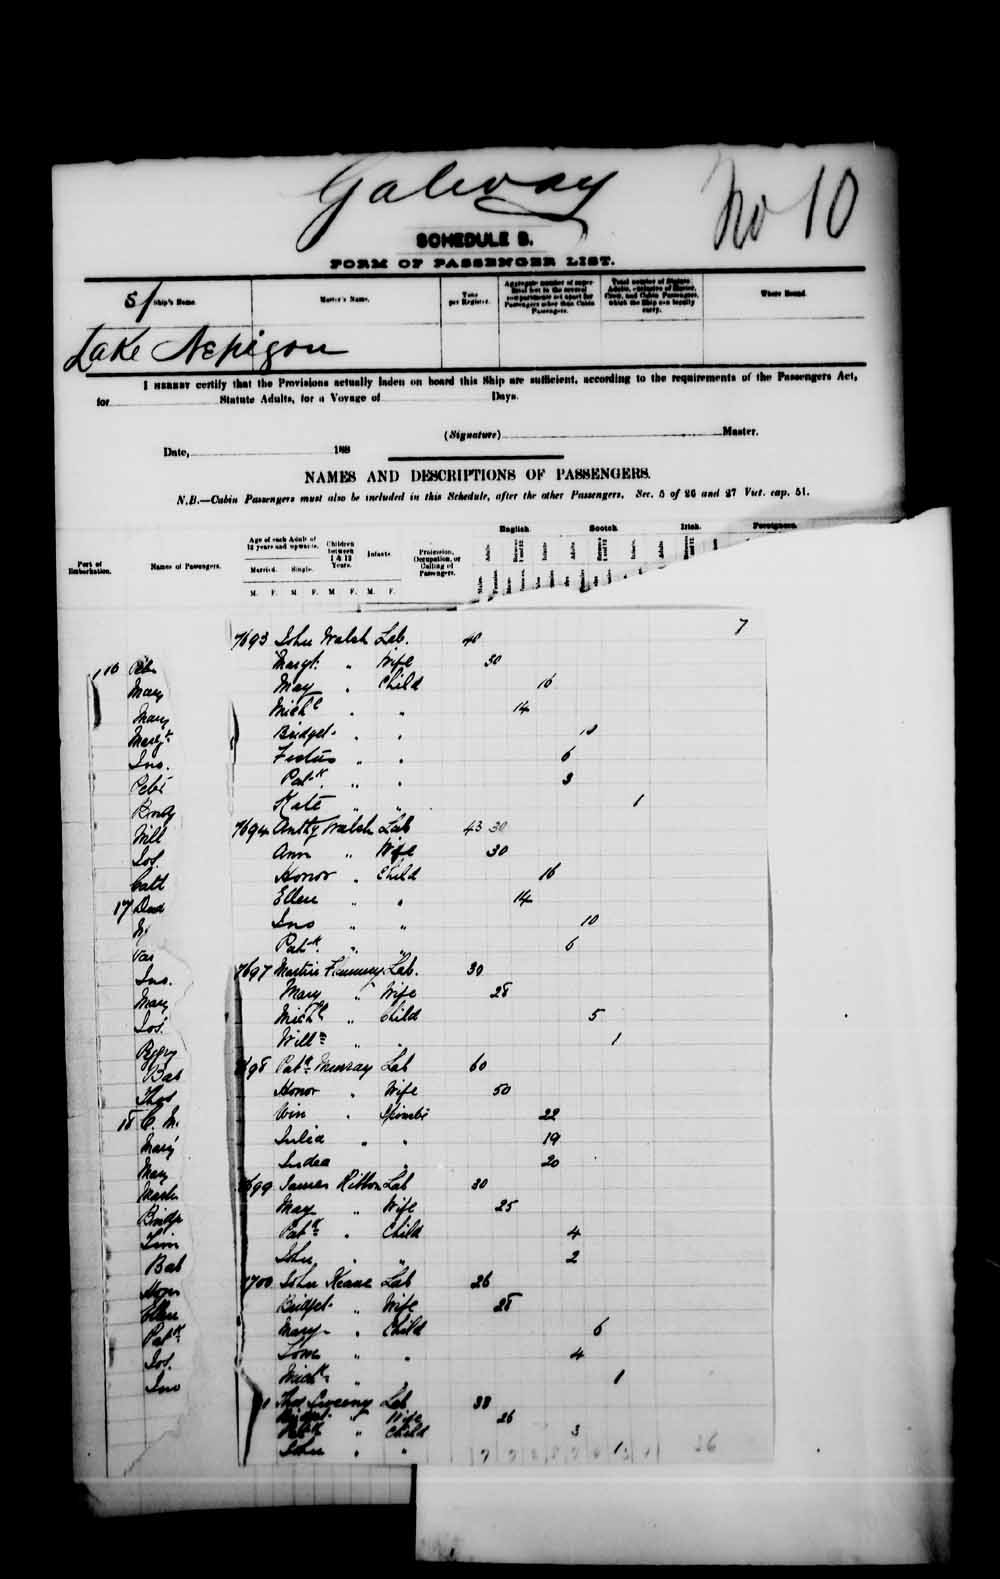 Digitized page of Passenger Lists for Image No.: e003541463